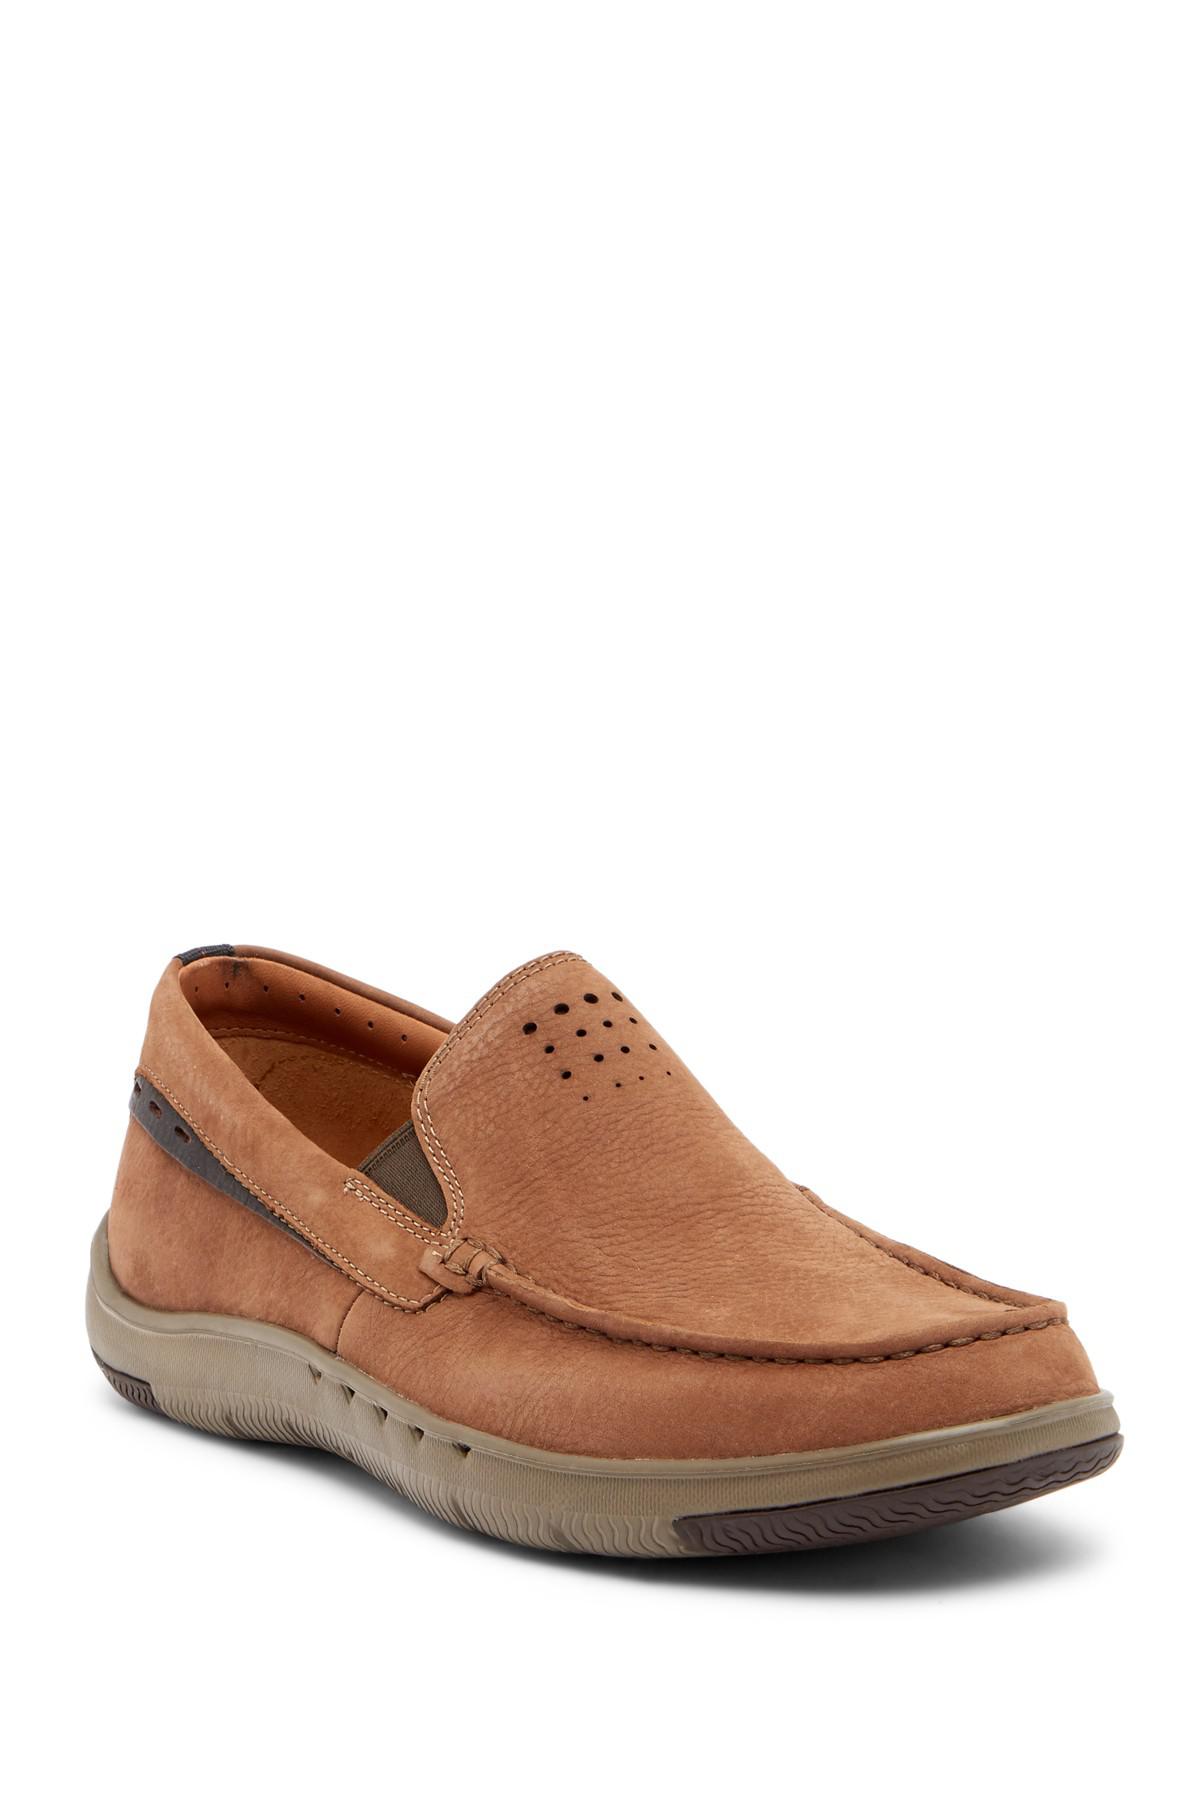 Lyst - Clarks Unmaslow Easy Nubuck Loafer - Wide Width Available in ...